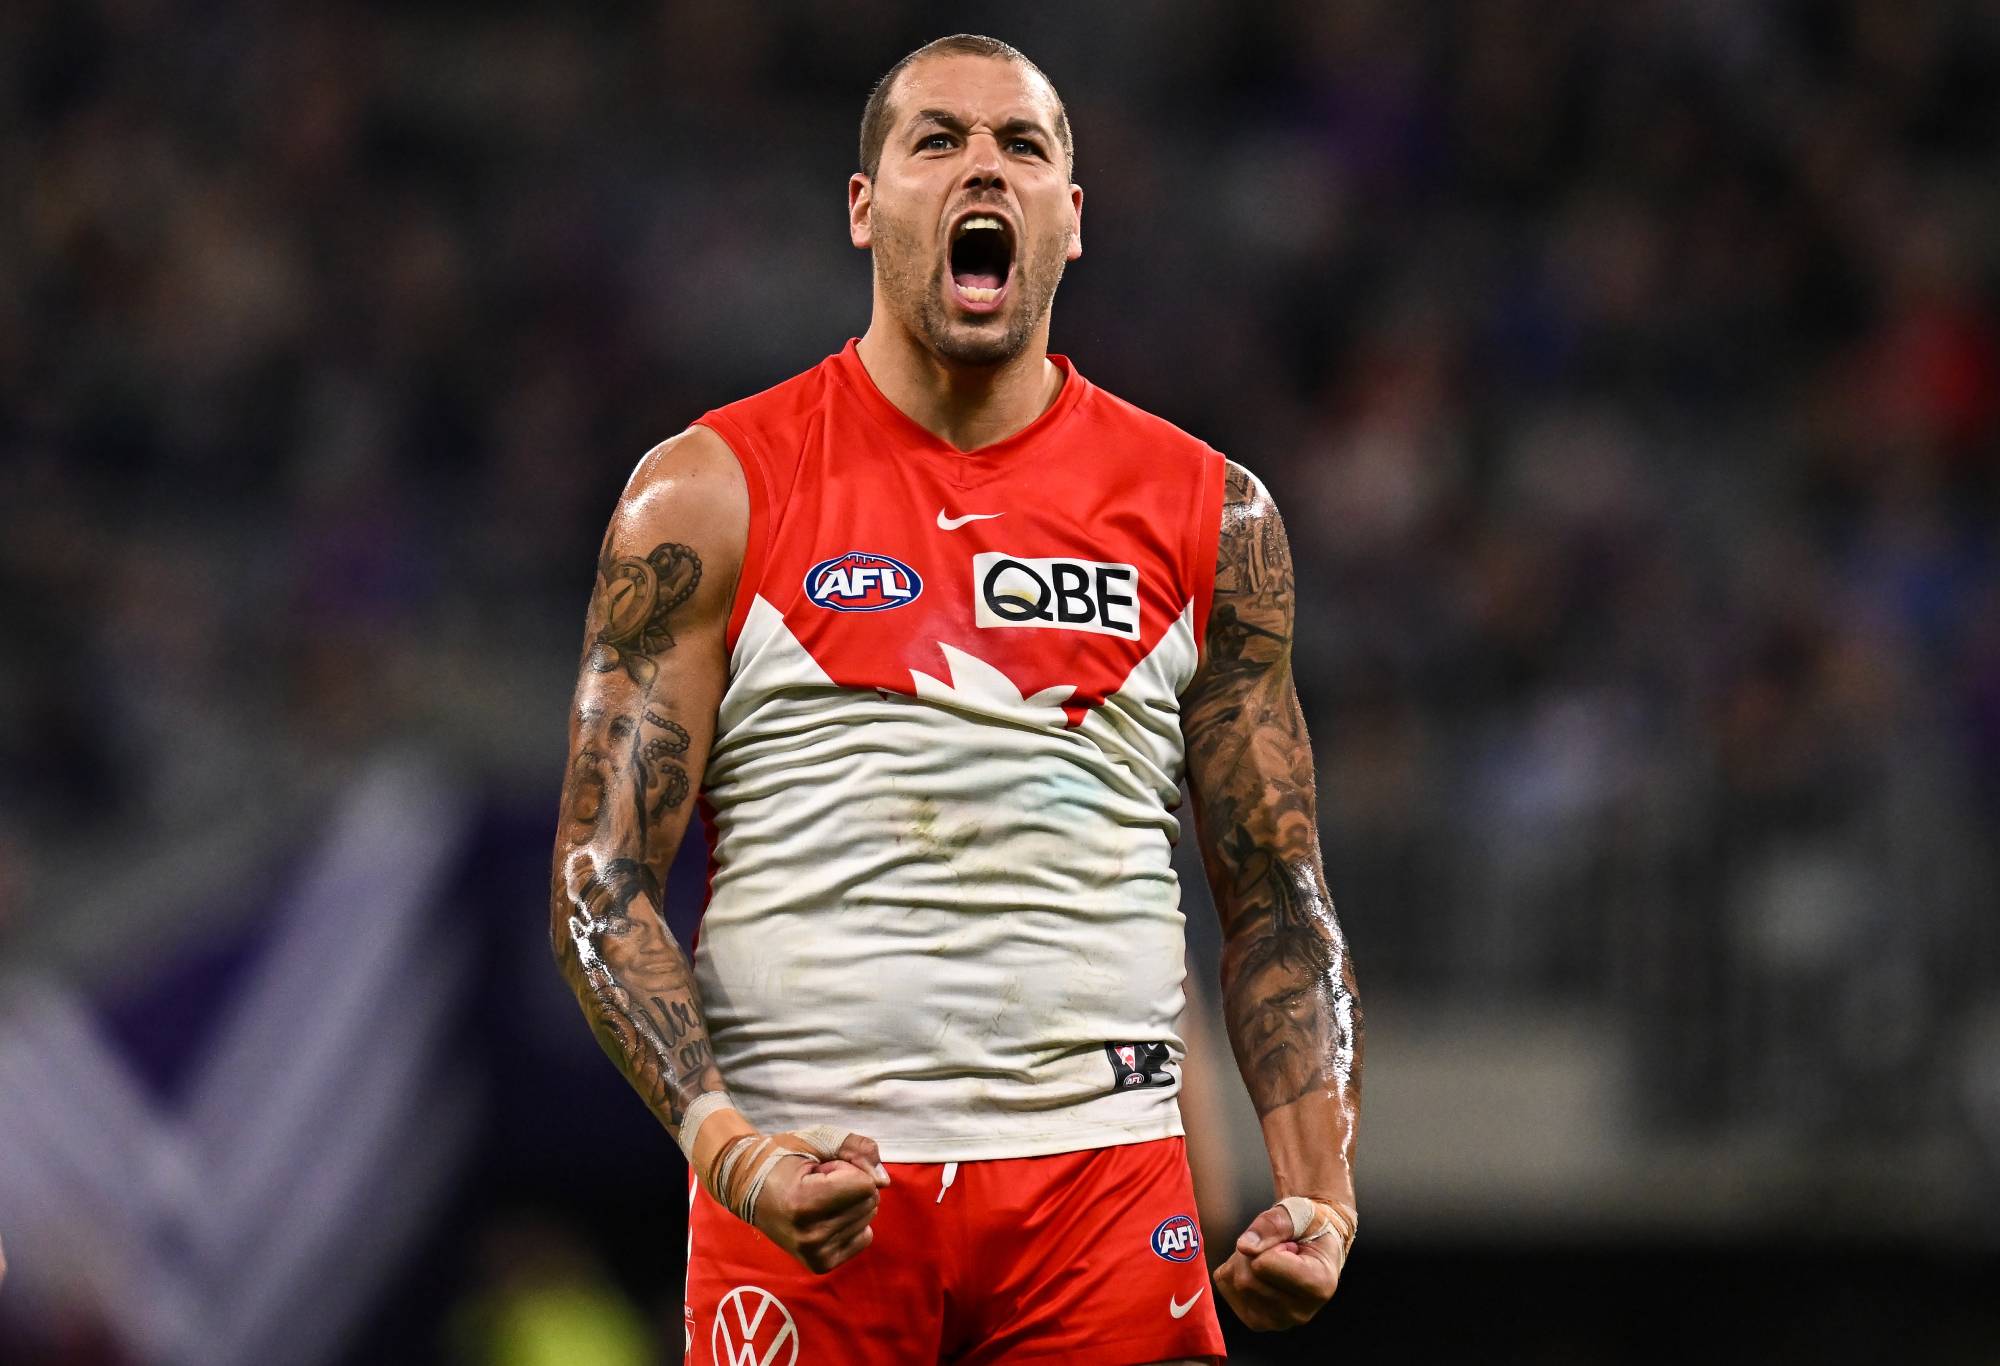 Lance Franklin of the Swans celebrates a goal during the 2023 AFL Round 19 match between the Fremantle Dockers and the Sydney Swans at Optus Stadium on July 22, 2023 in Perth, Australia. (Photo by Daniel Carson/AFL Photos via Getty Images)